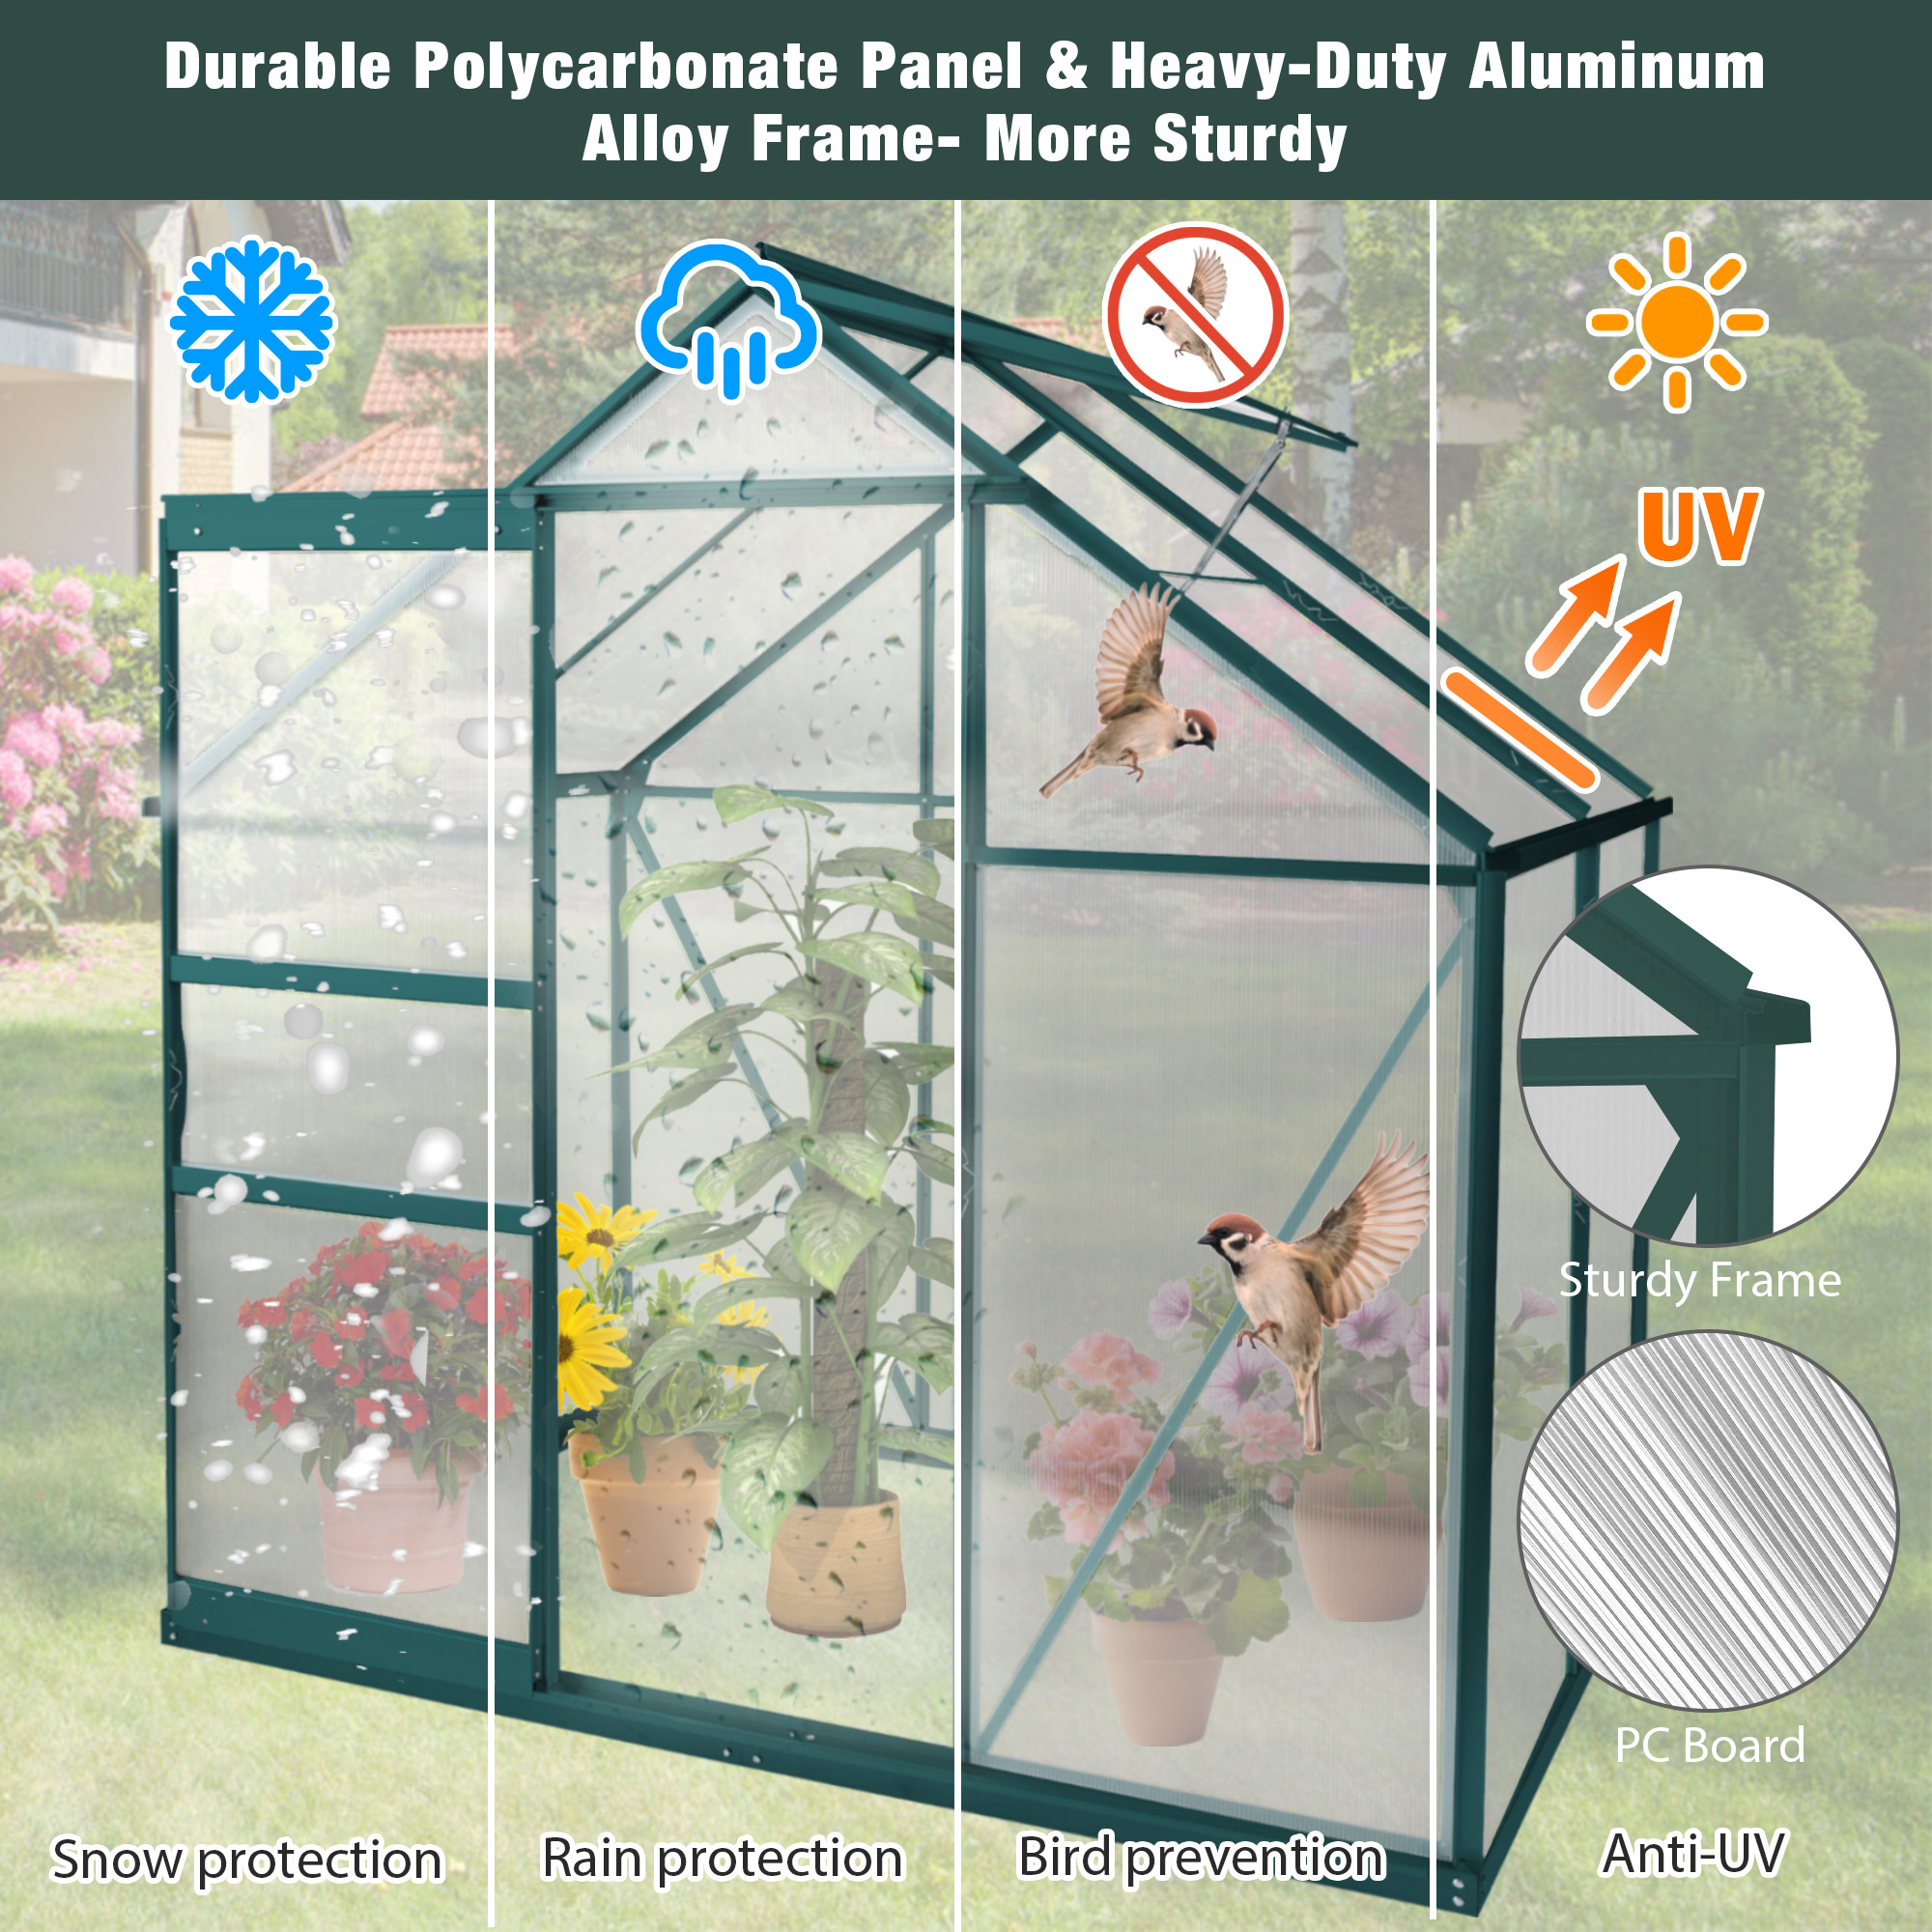 6'X 4' Walk-In Greenhouse with Roof Vent and Rain Gutter for Outside,Polycarbonate Aluminum Heavy Duty Greenhouse for Flowers, Vegetables, Plants Backyard Garden - image 5 of 7